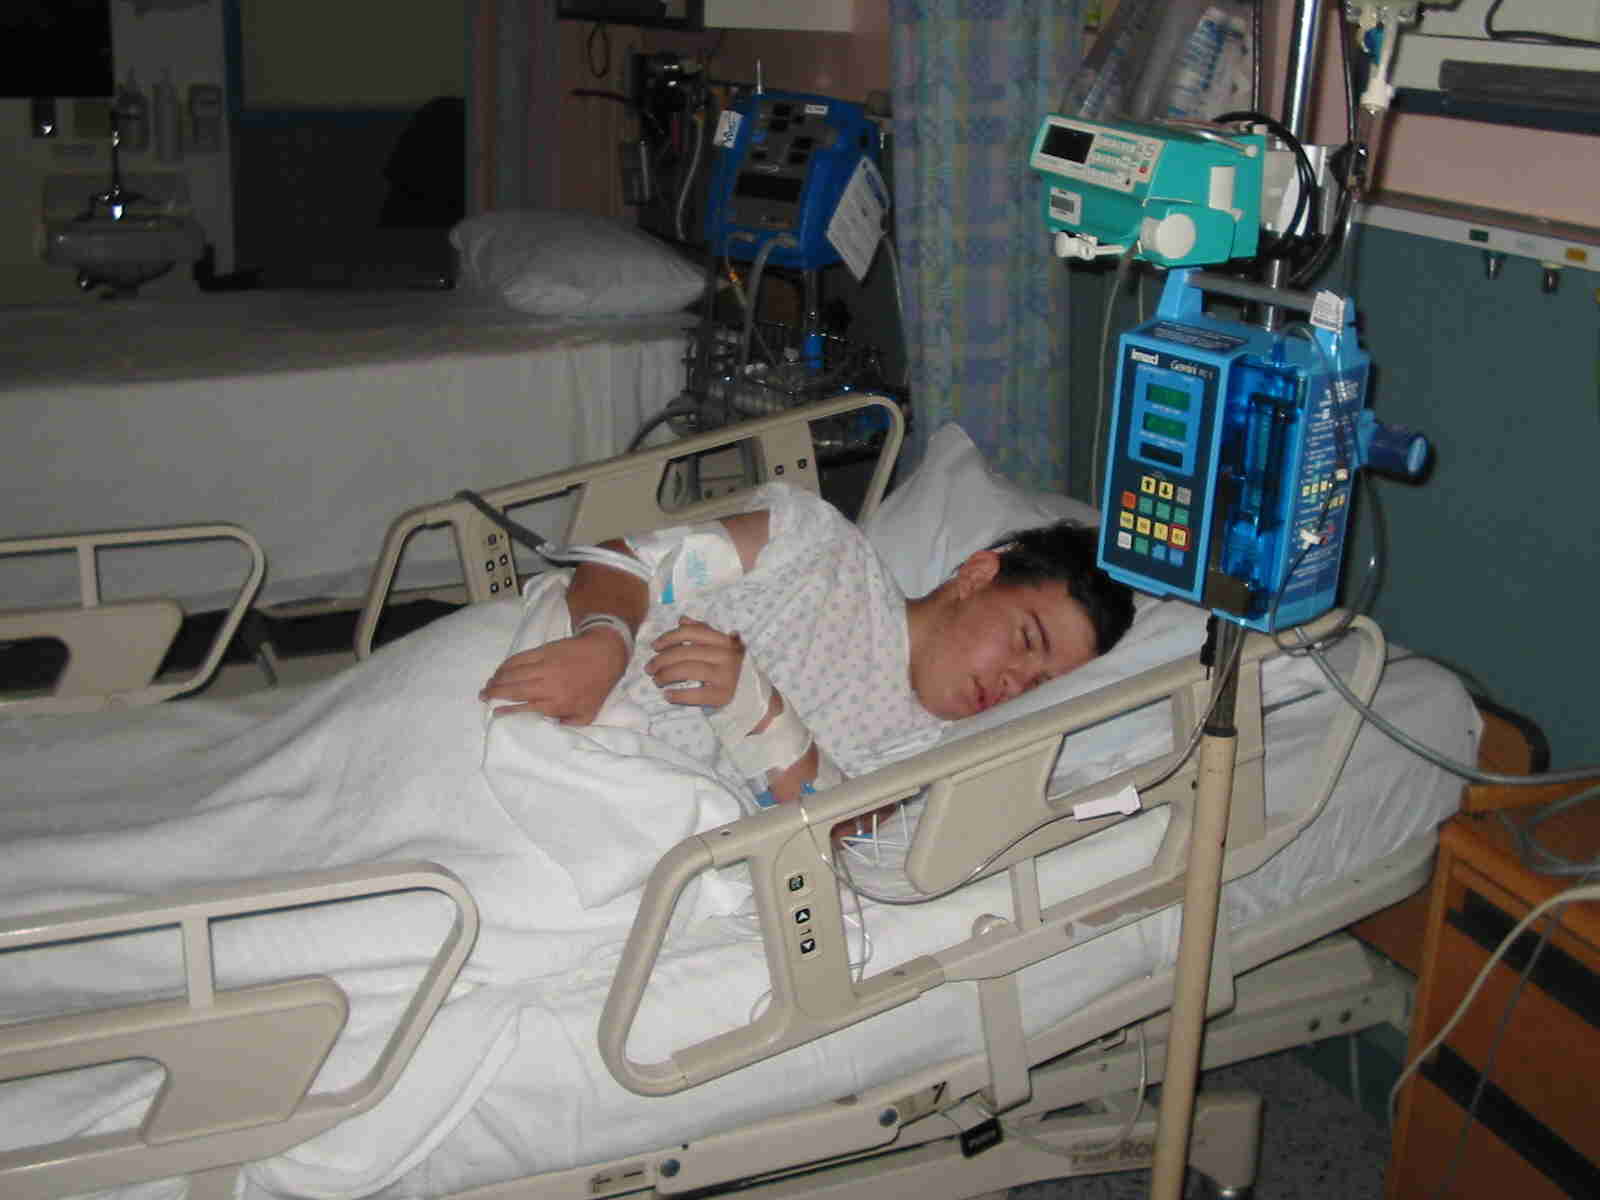 Isaac resting in the hospital bed after his brain surgery on Dec. 11th, 2003